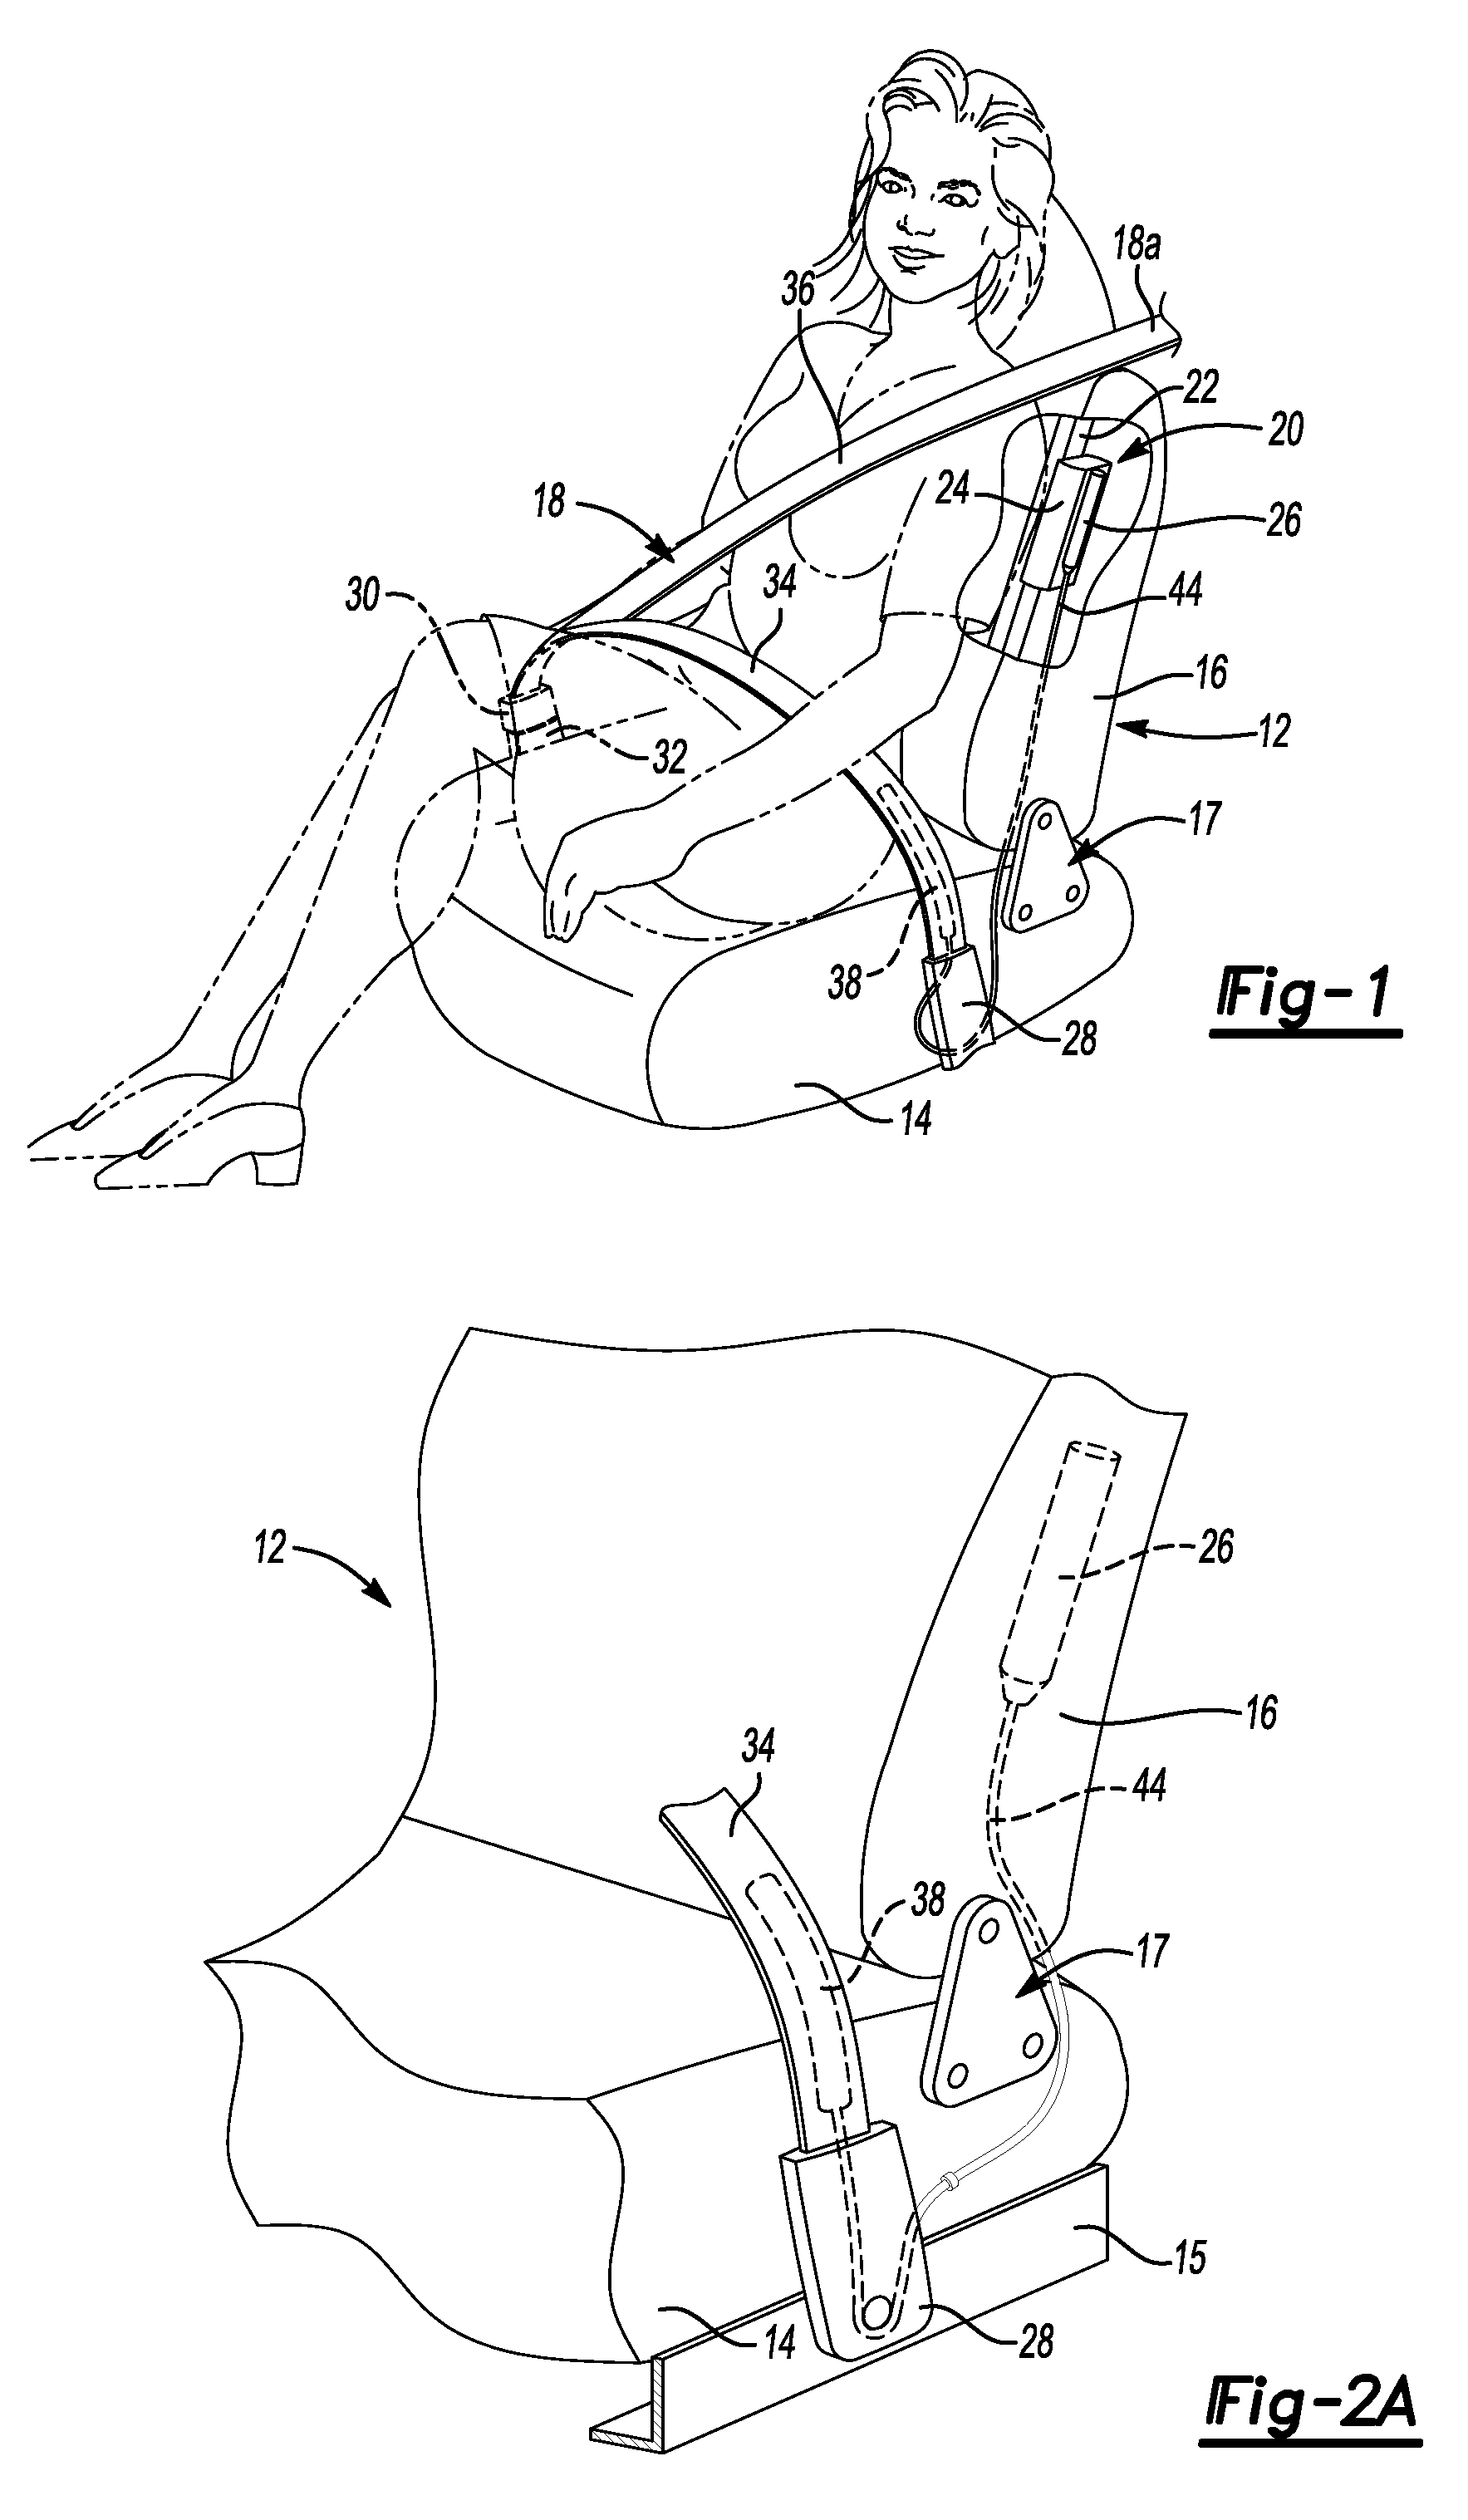 Integrated side airbag and inflatable belt